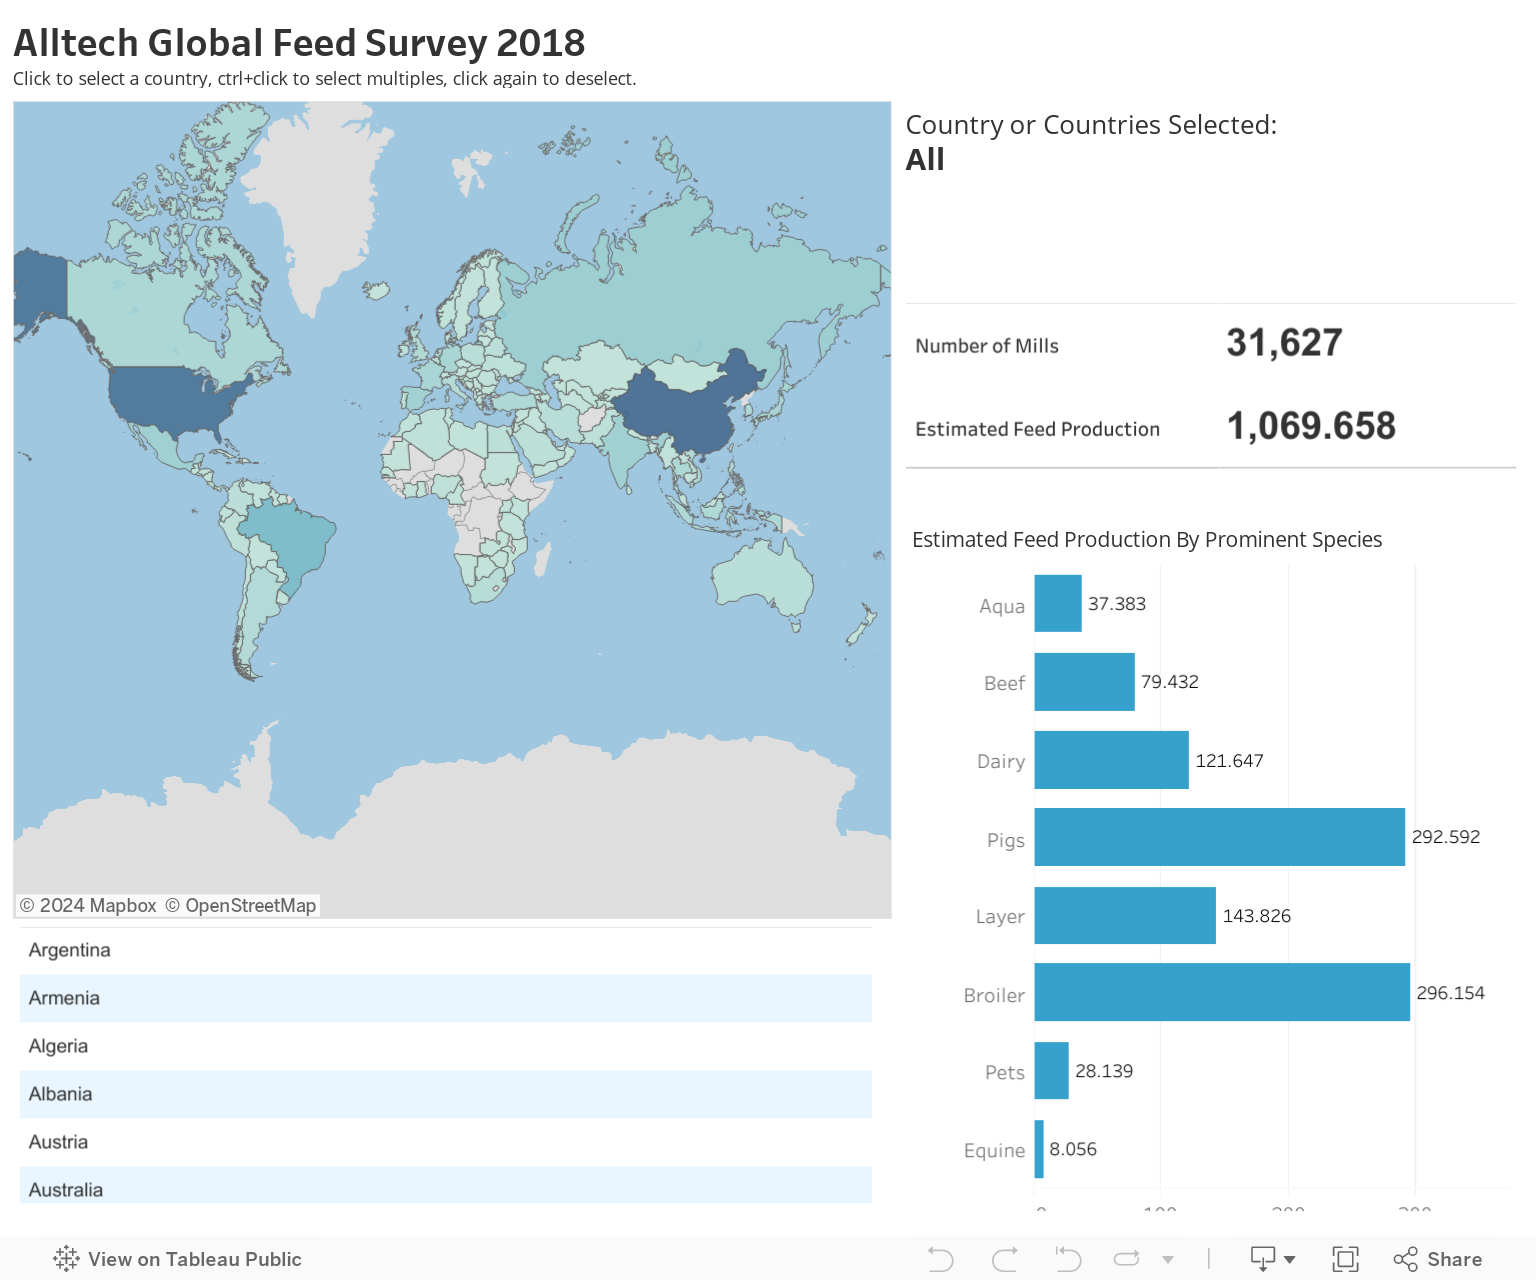 Alltech Global Feed Survey 2018Click to select a country, ctrl+click to select multiples, click again to deselect. 